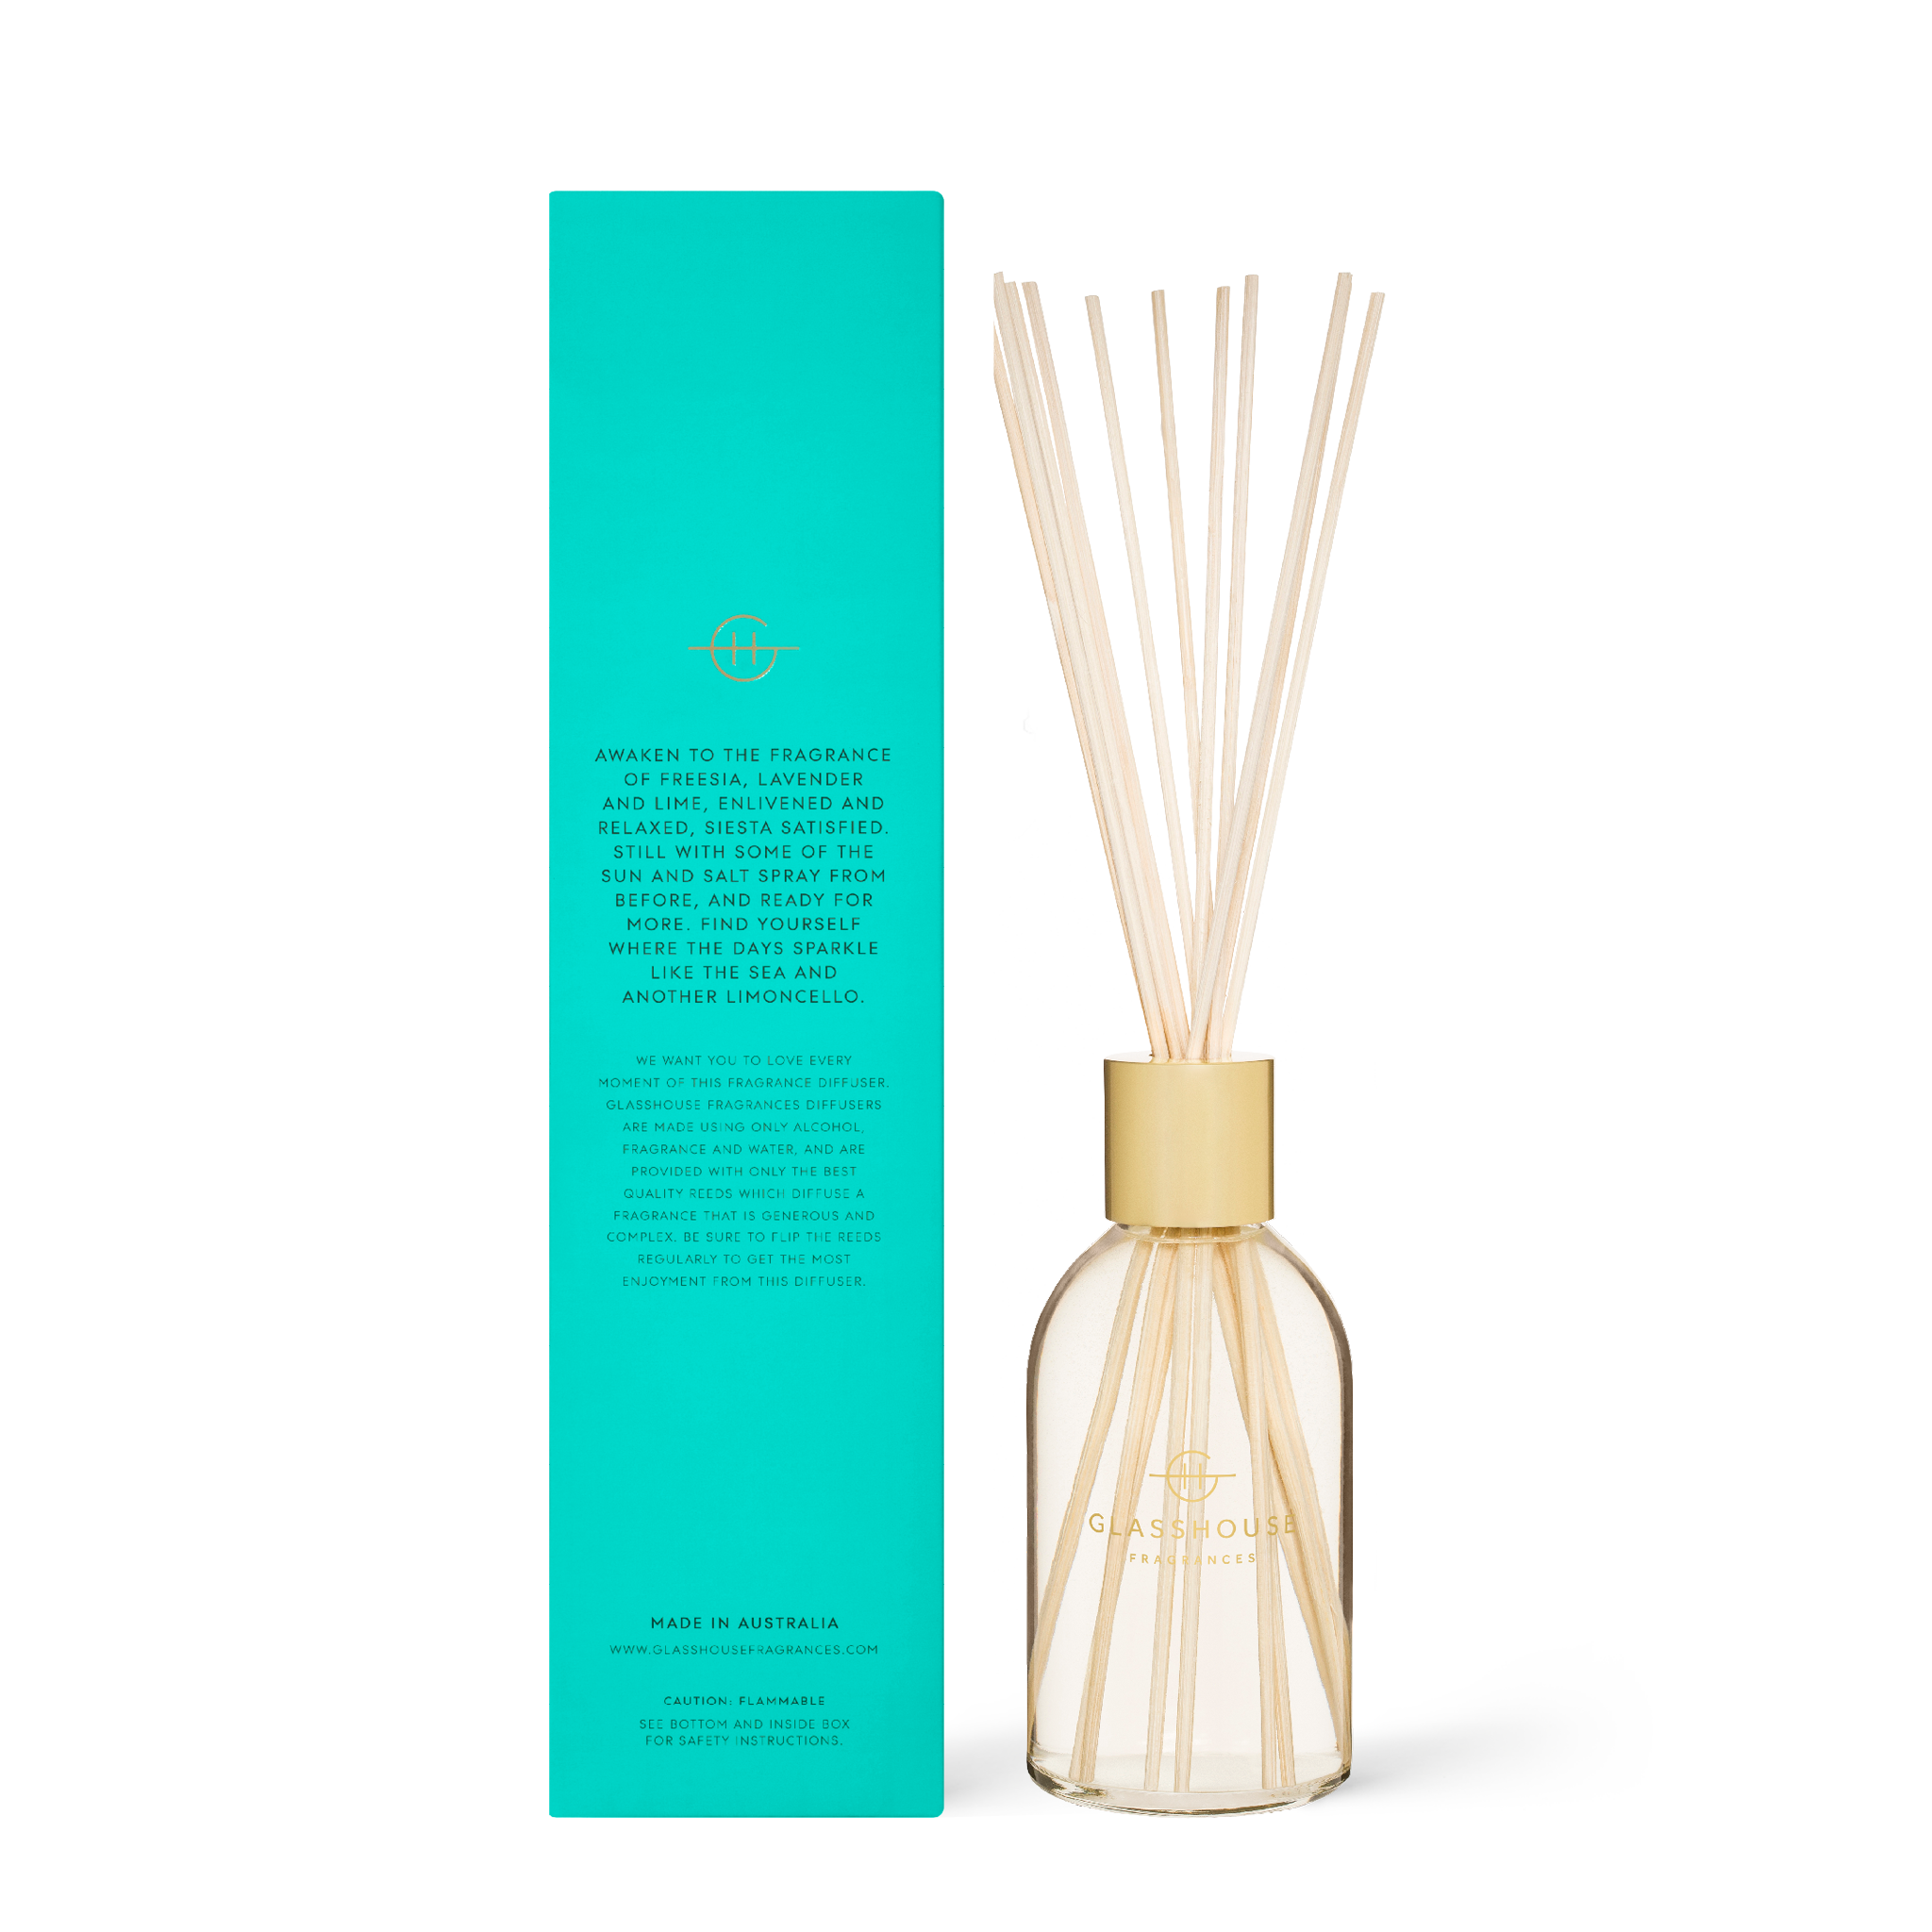 Glasshouse Fragrances Lost in Amalfi Sea Mist 250mL Fragrance Diffuser with box - back of product shot